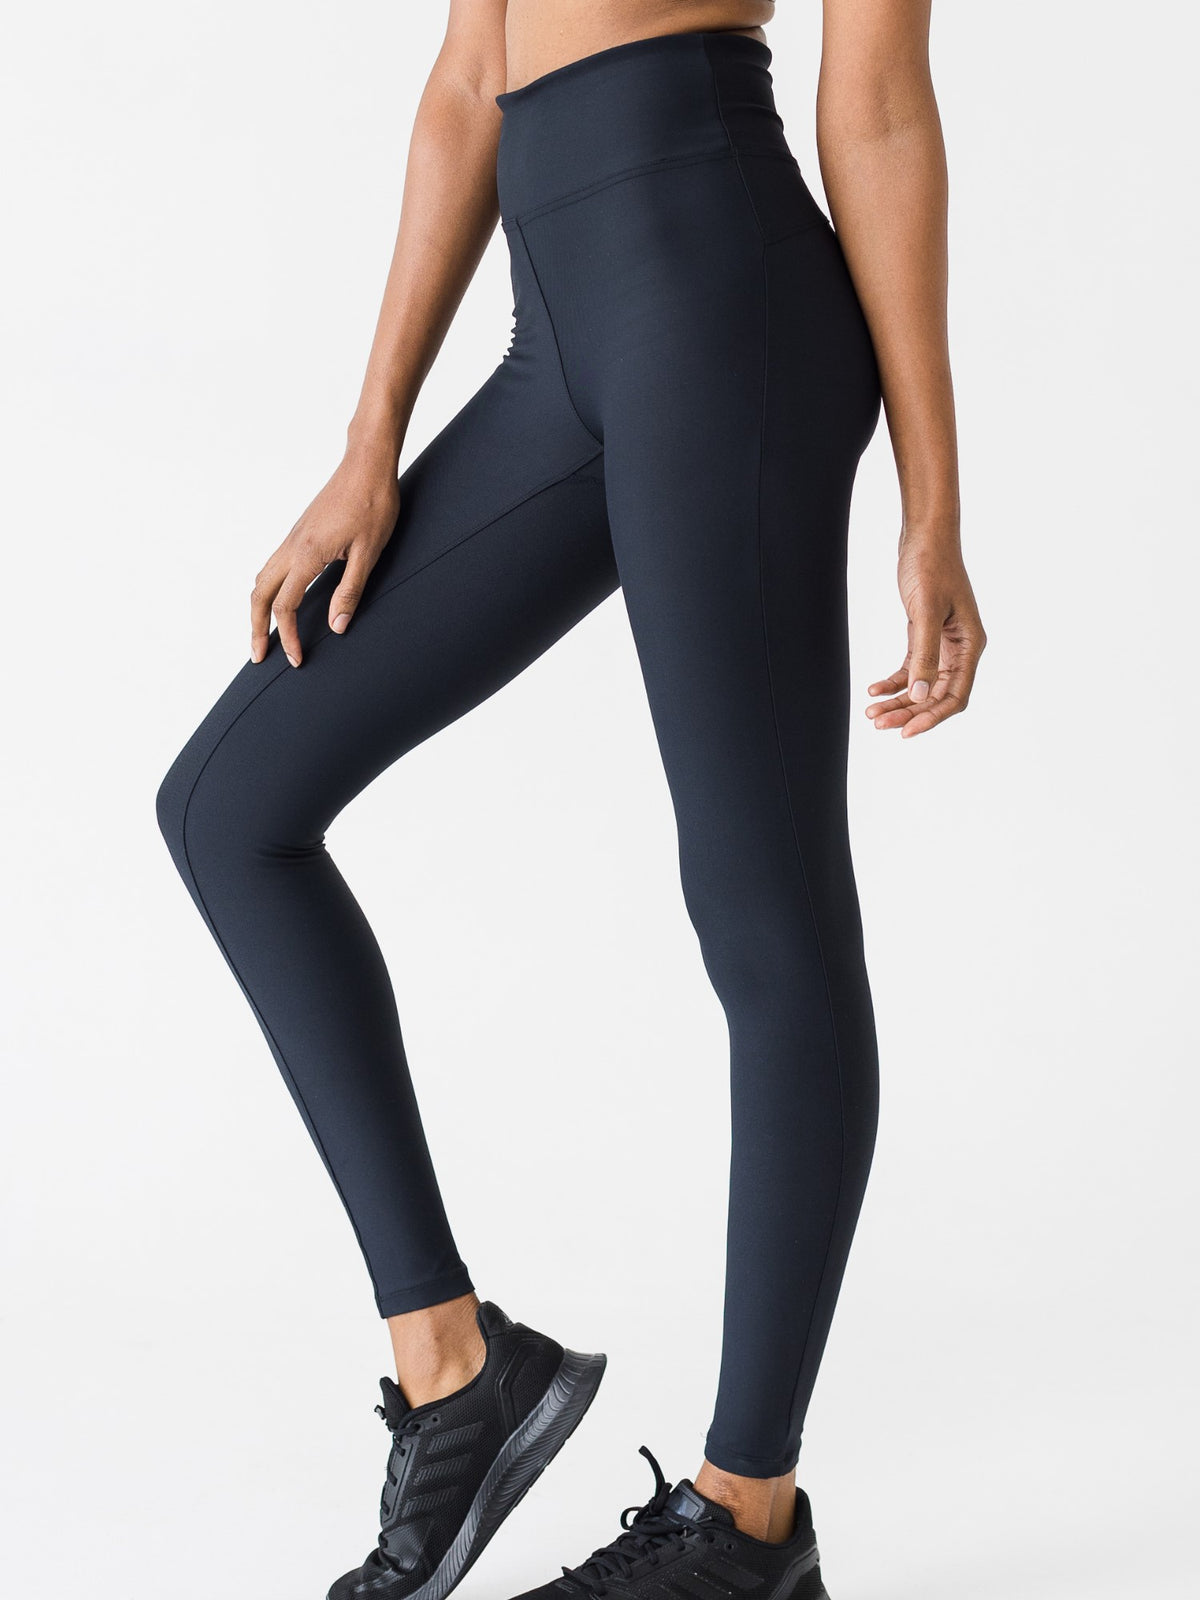 Leggings and Active Pants